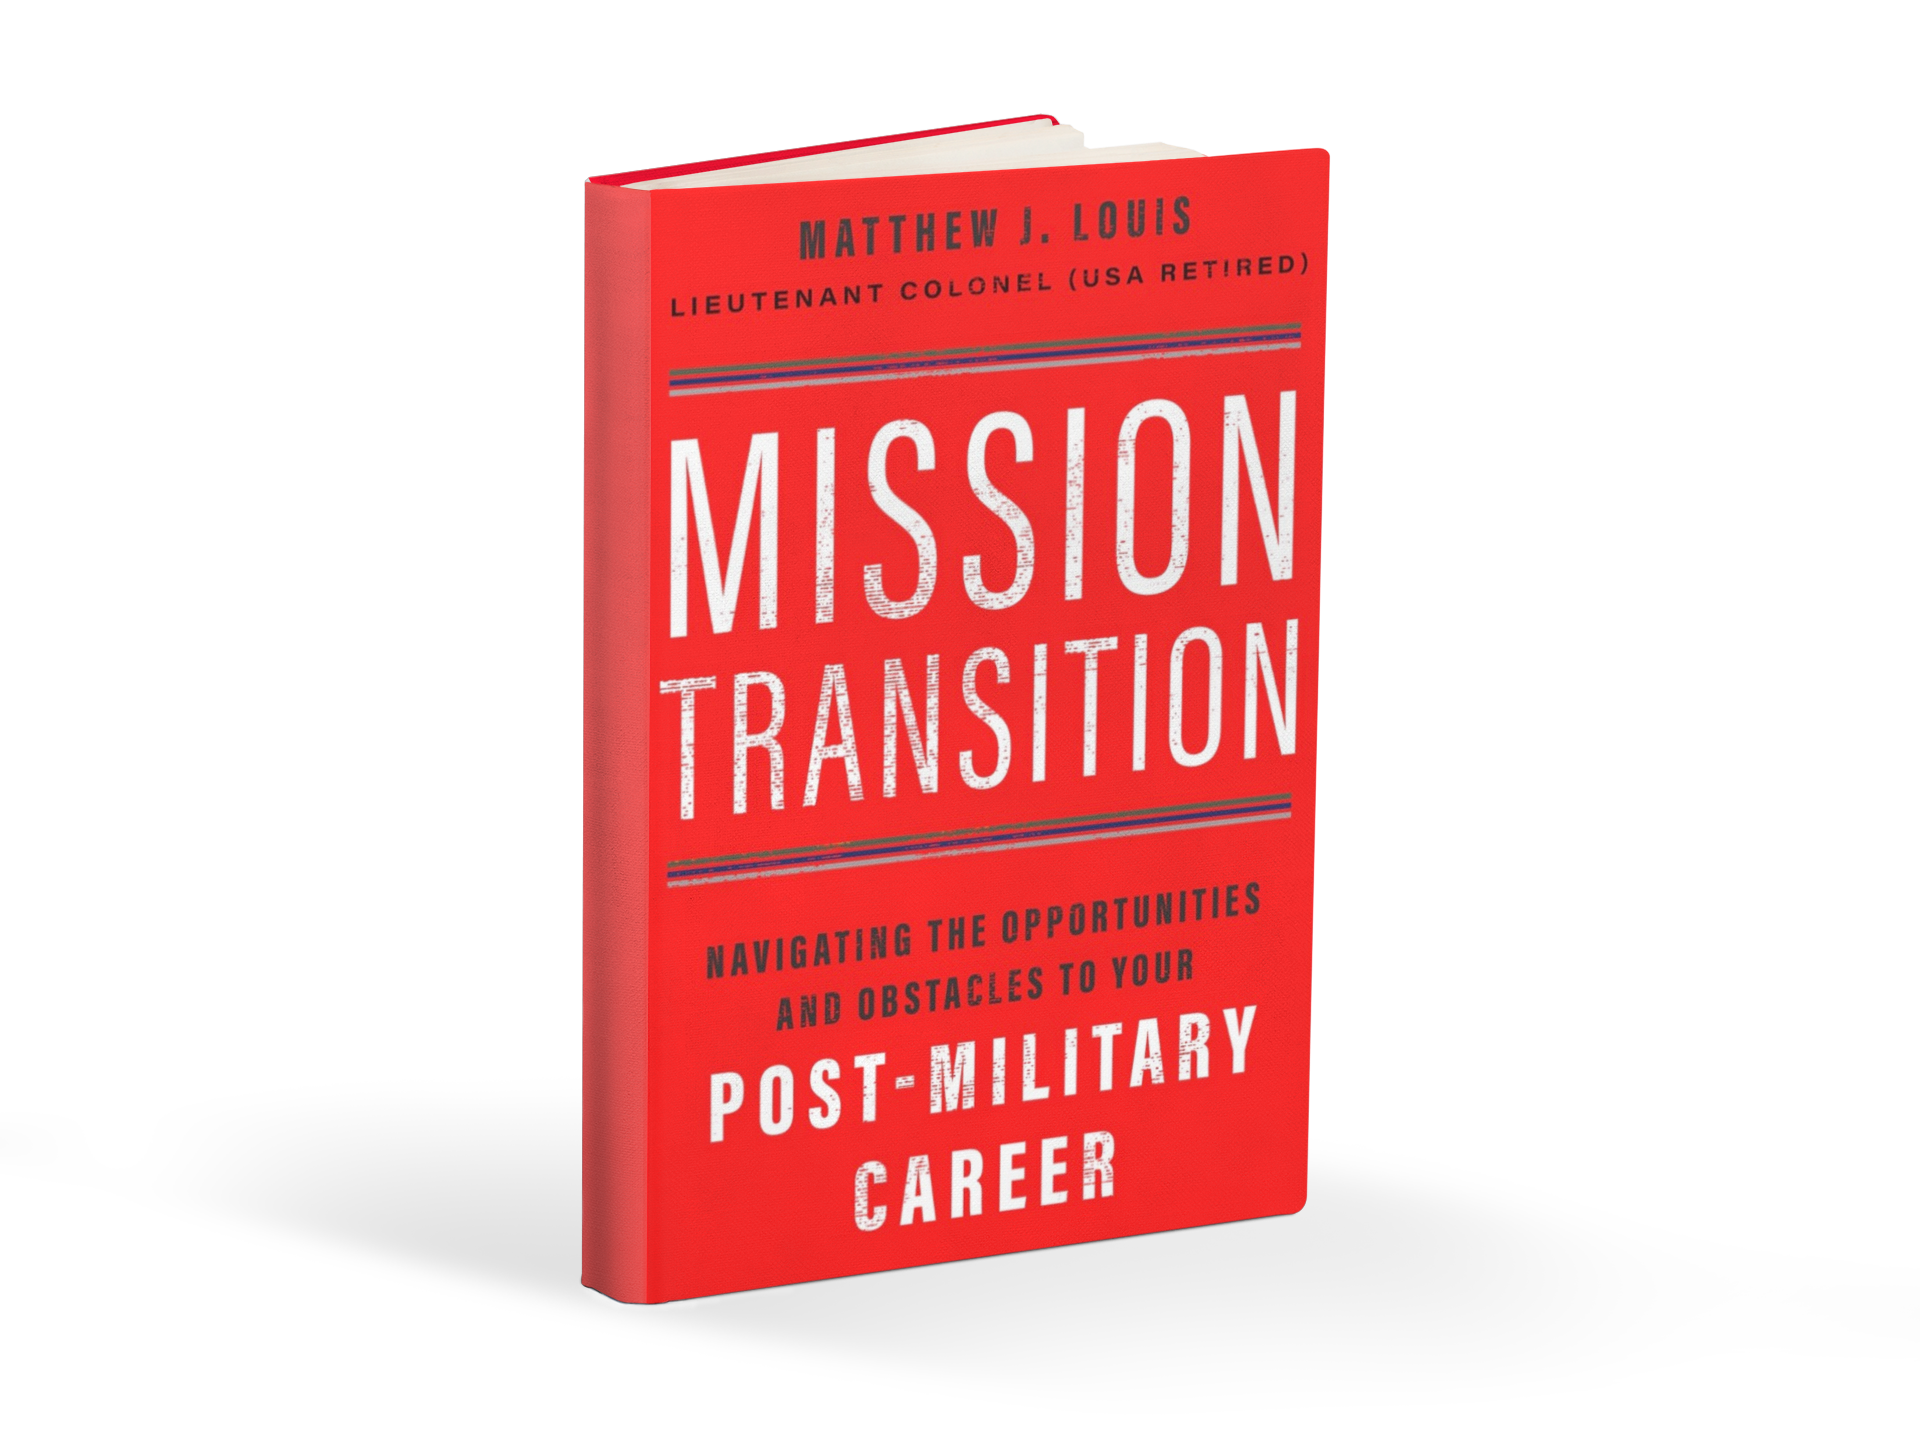 Matthew J. Louis’ Mission Transition Offers an Inspired Approach to Successfully Finding a Career After Military Service